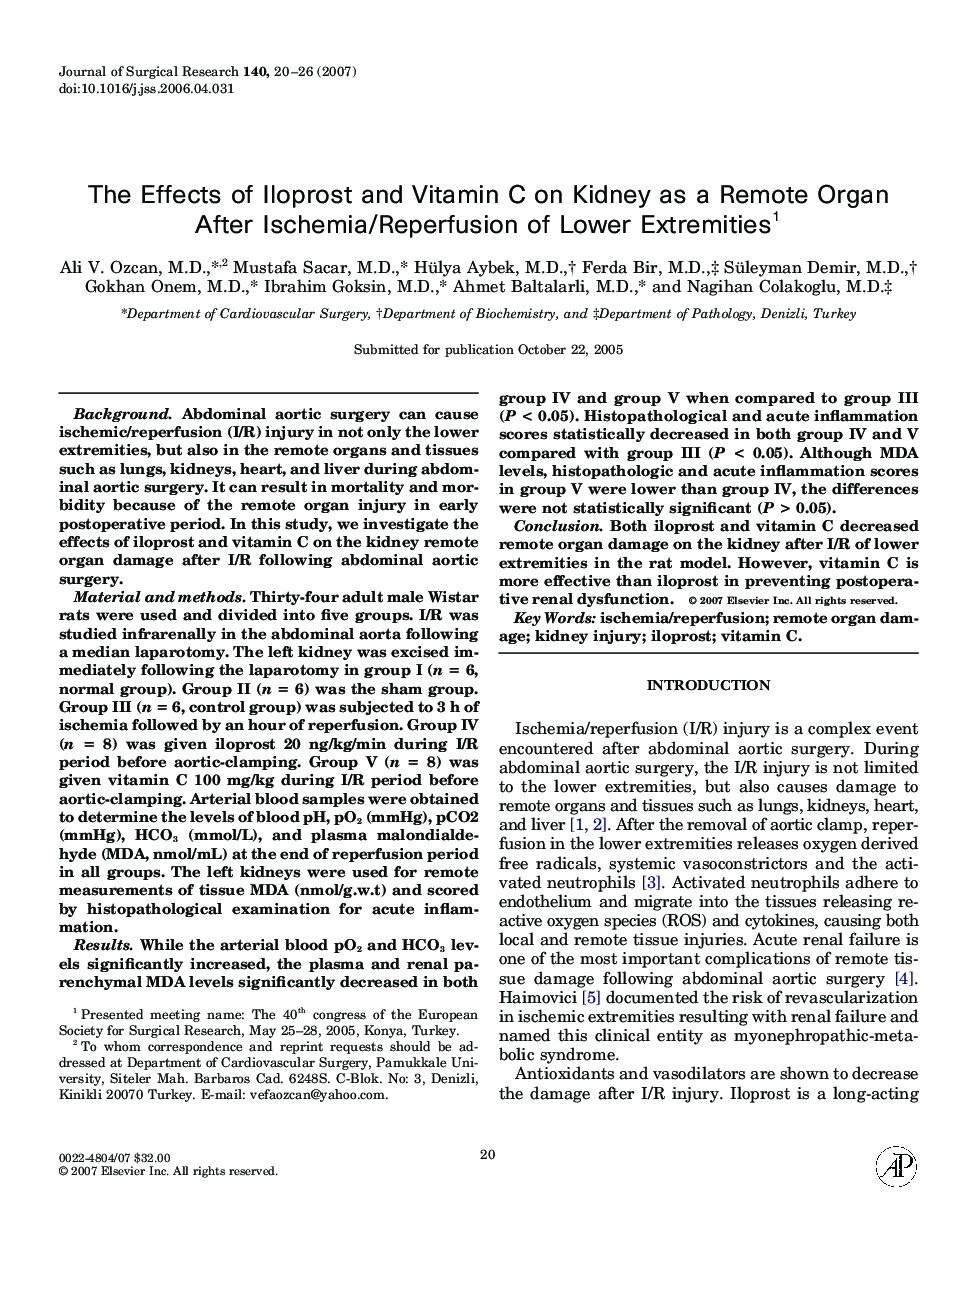 The Effects of Iloprost and Vitamin C on Kidney as a Remote Organ After Ischemia/Reperfusion of Lower Extremities